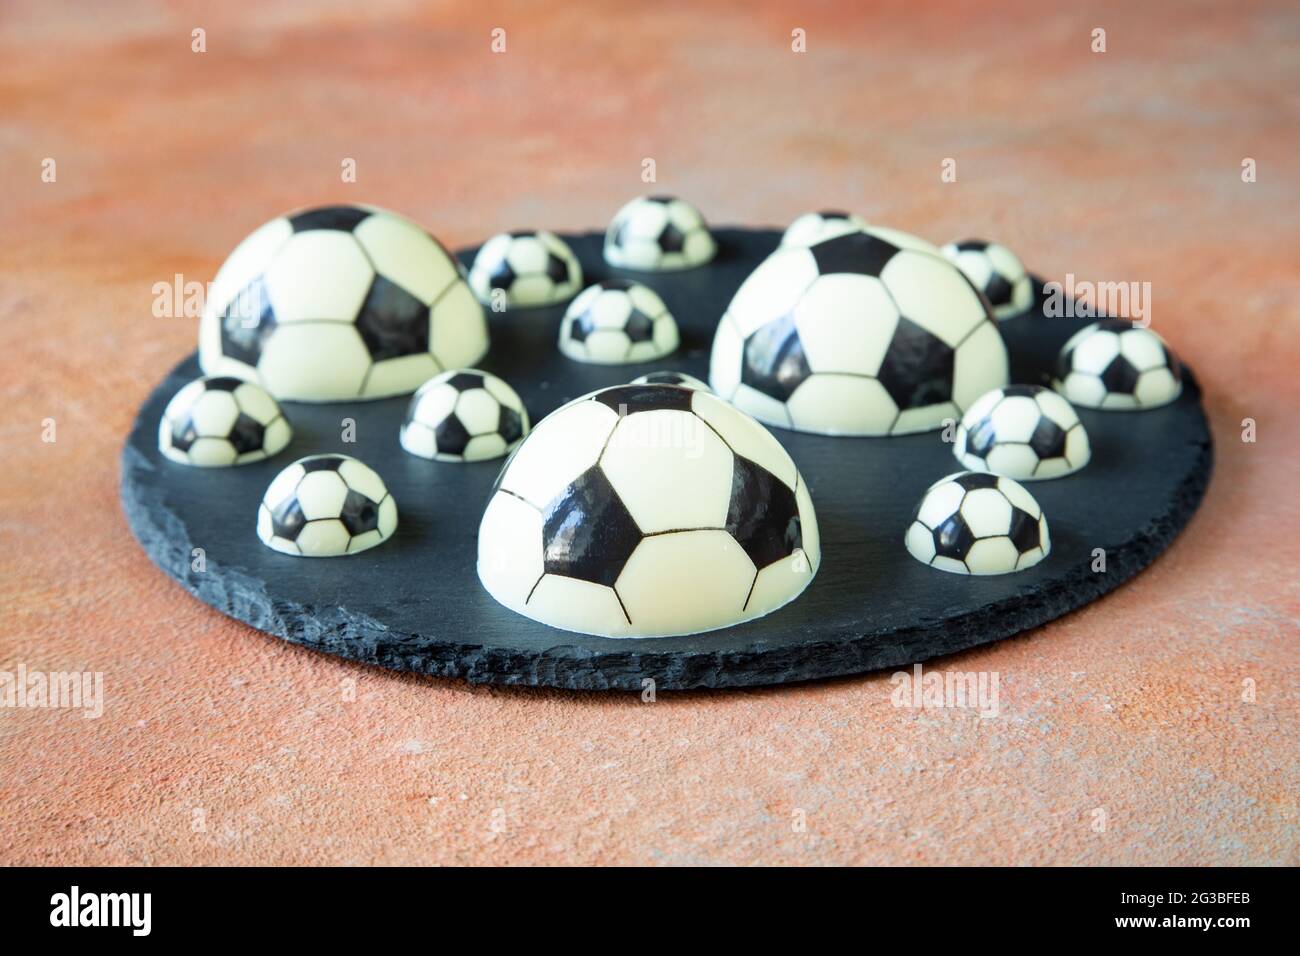 A delicious dessert of chocolate football balls of different shapes on a black serving plate - a concept of sports photography for a football fan Stock Photo